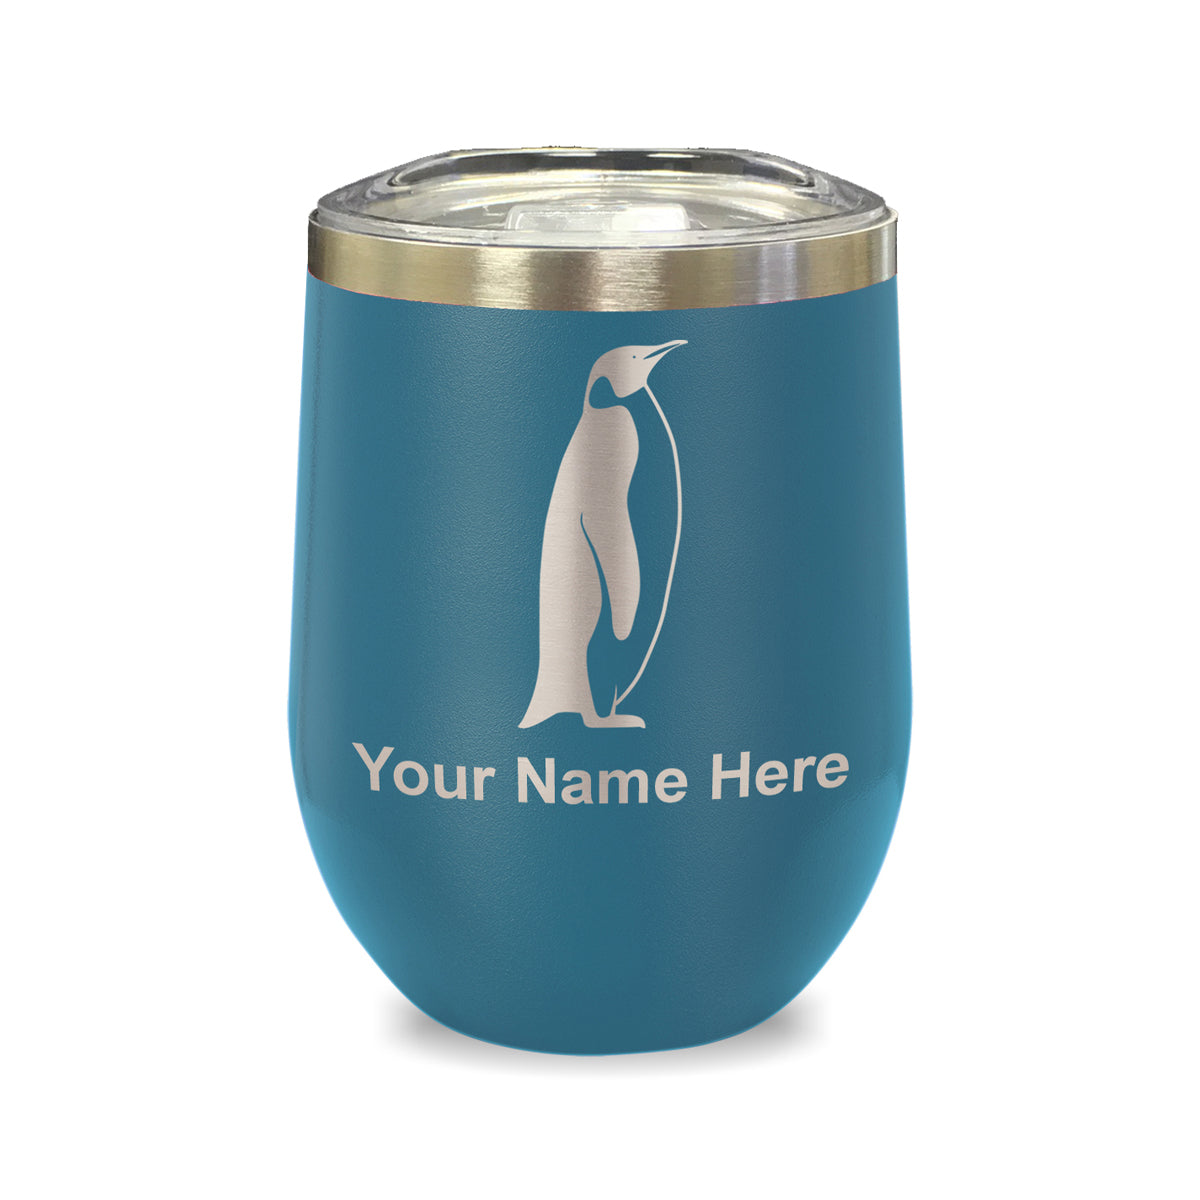 LaserGram Double Wall Stainless Steel Wine Glass, Penguin, Personalized Engraving Included